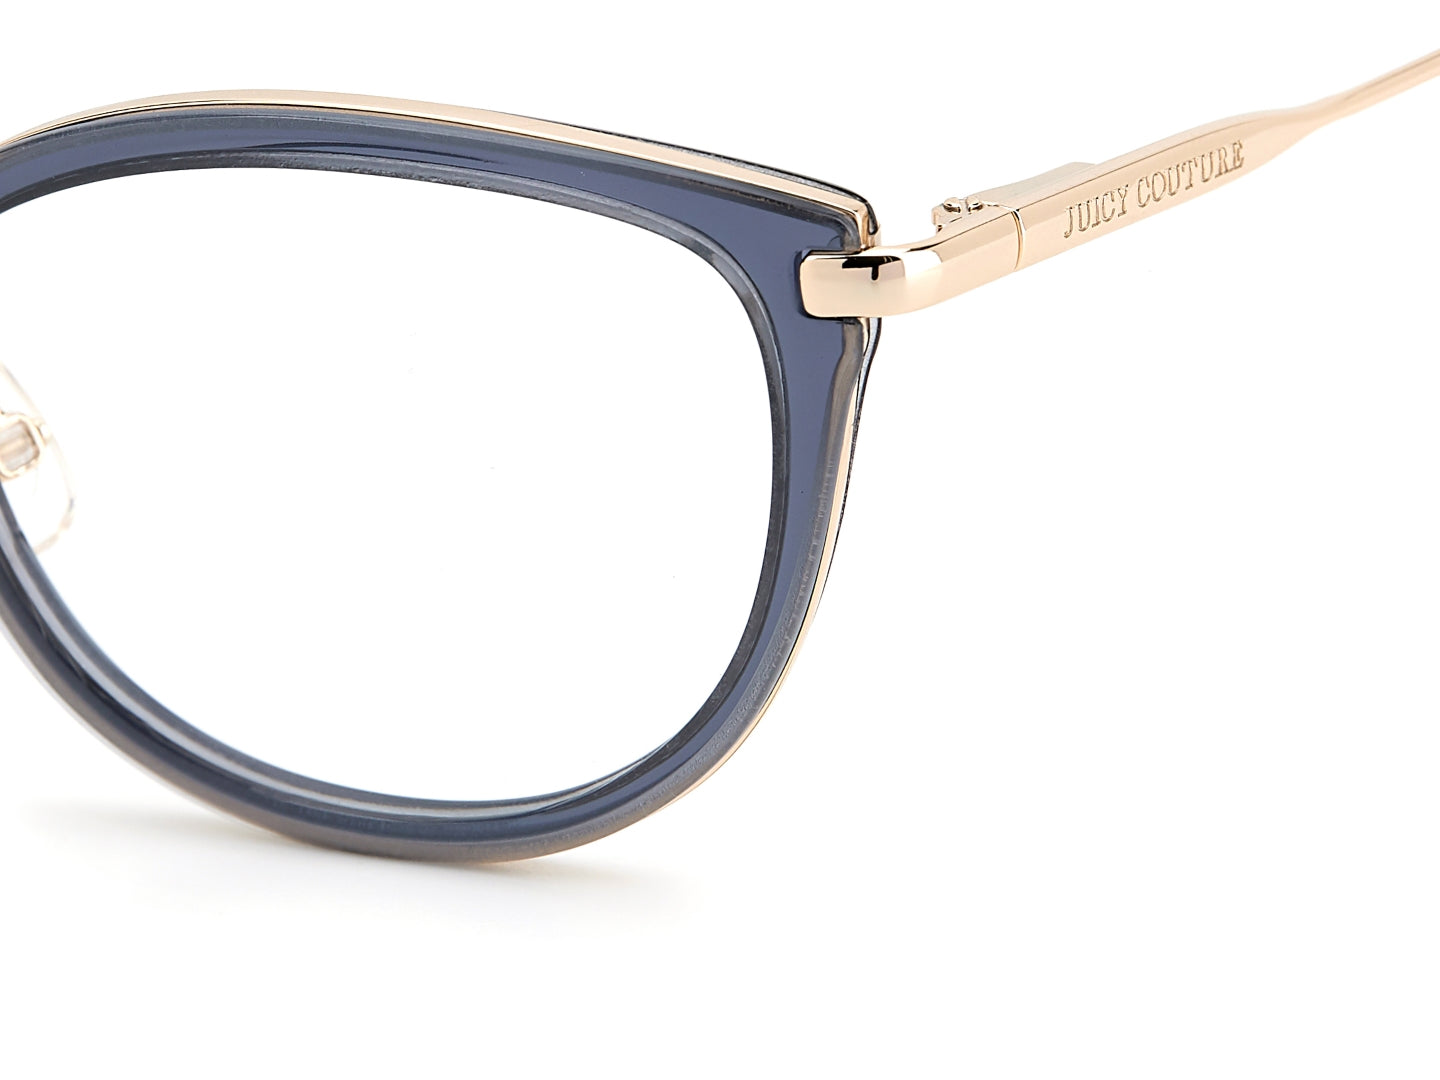 Juicy Couture Woman Round Eyeglasses